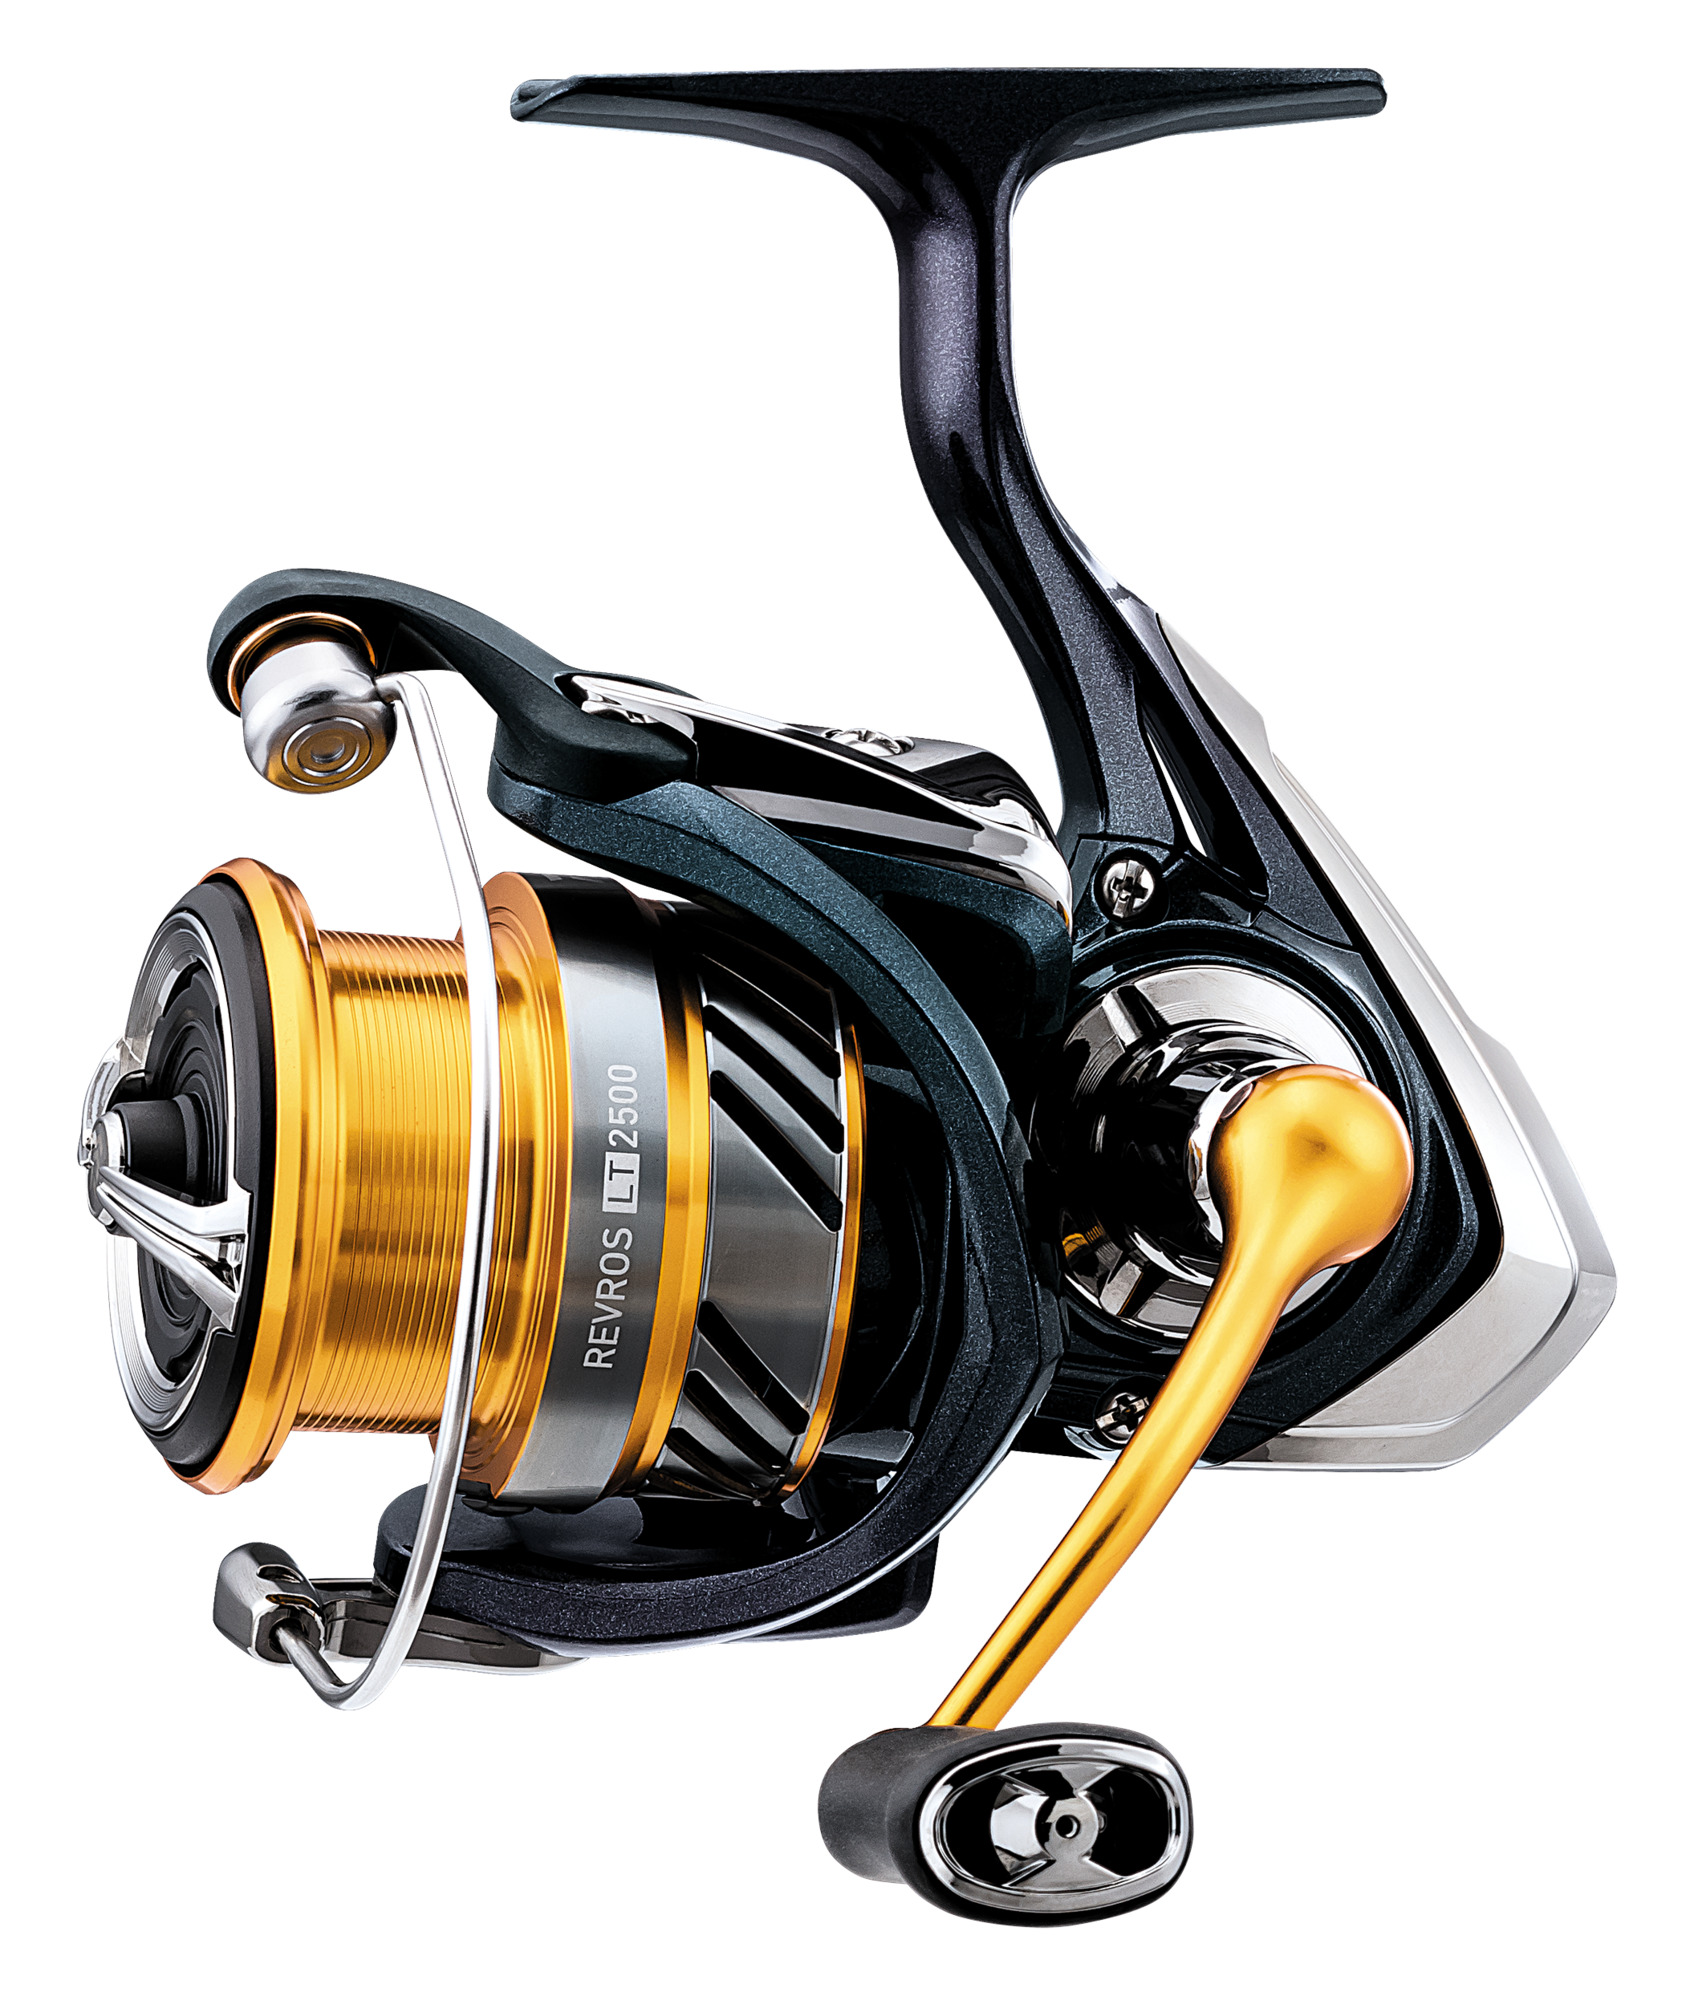 Daiwa Revros LT Spinning Reel , Up to $3.00 Off with Free S&H — CampSaver